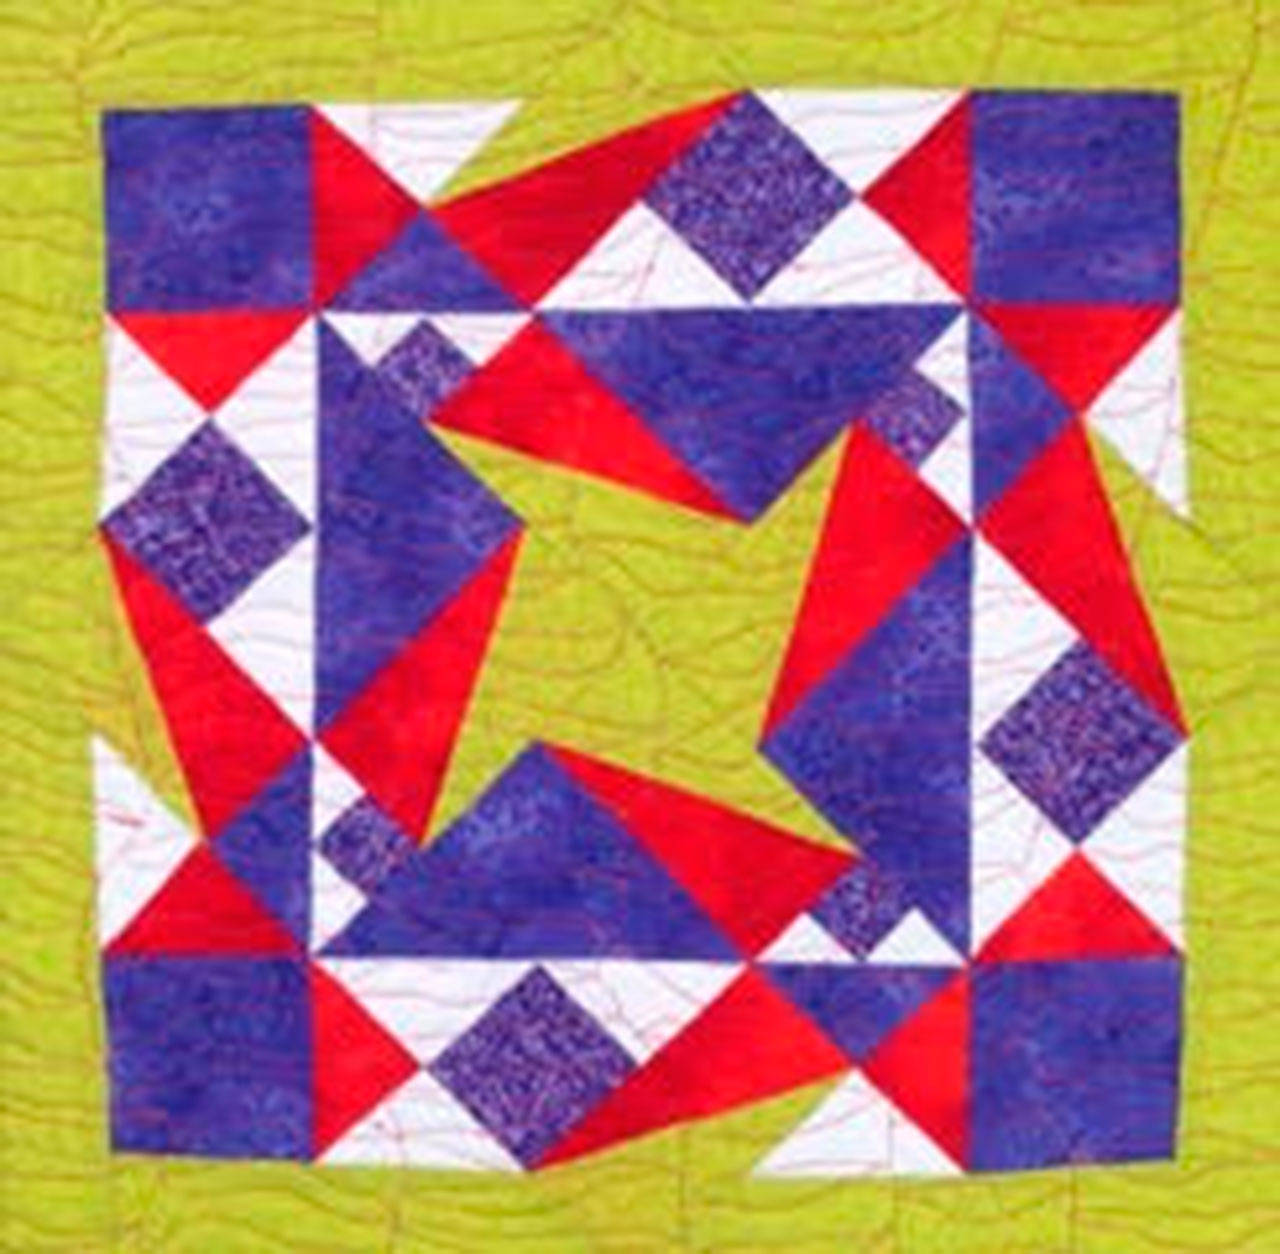 Friday Harbor art walk features 21 quilts, 14 locations